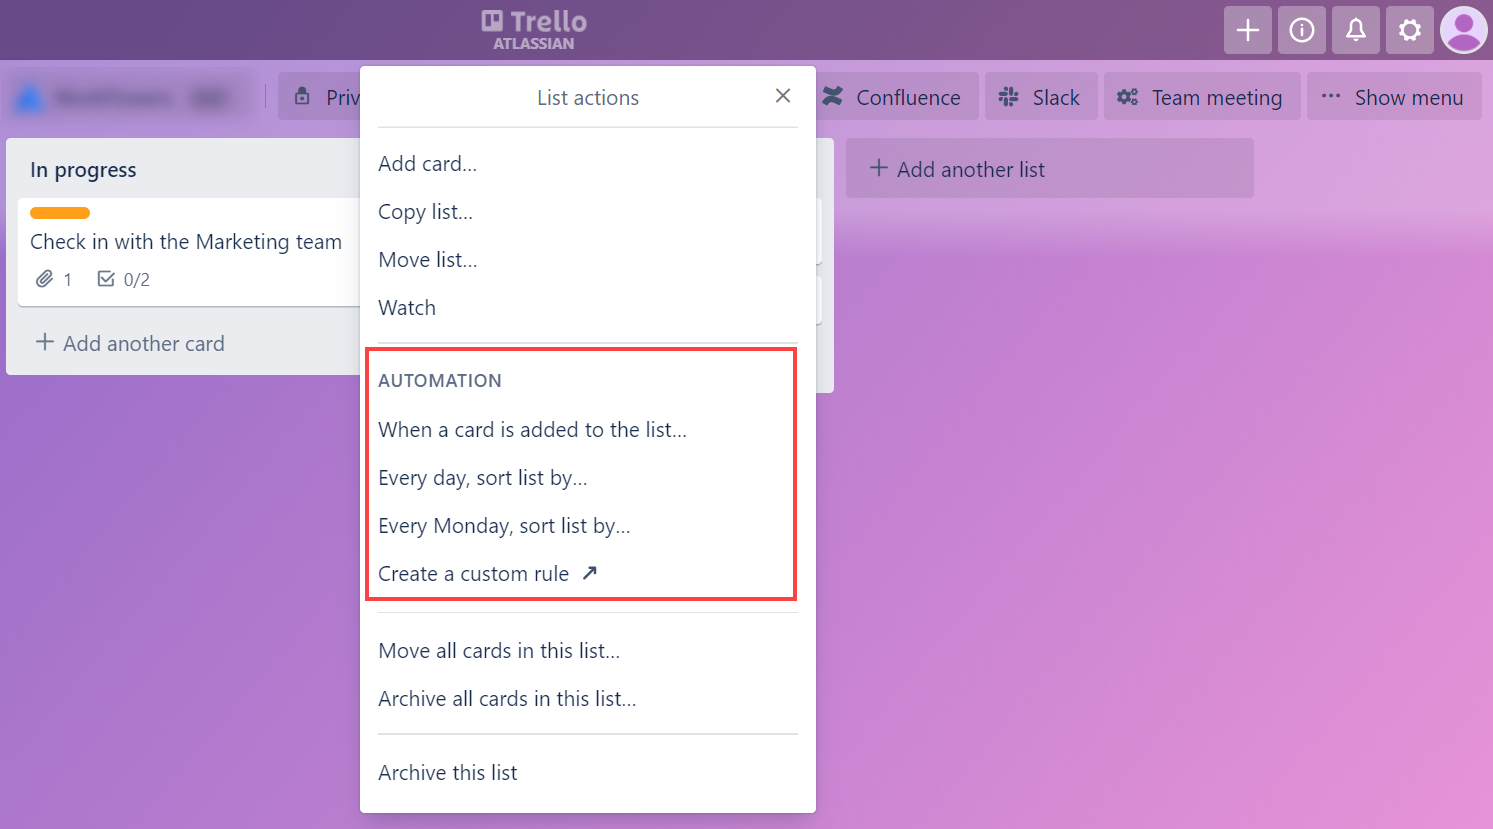 List actions menu of a Trello card with the Automation section selected in the middle